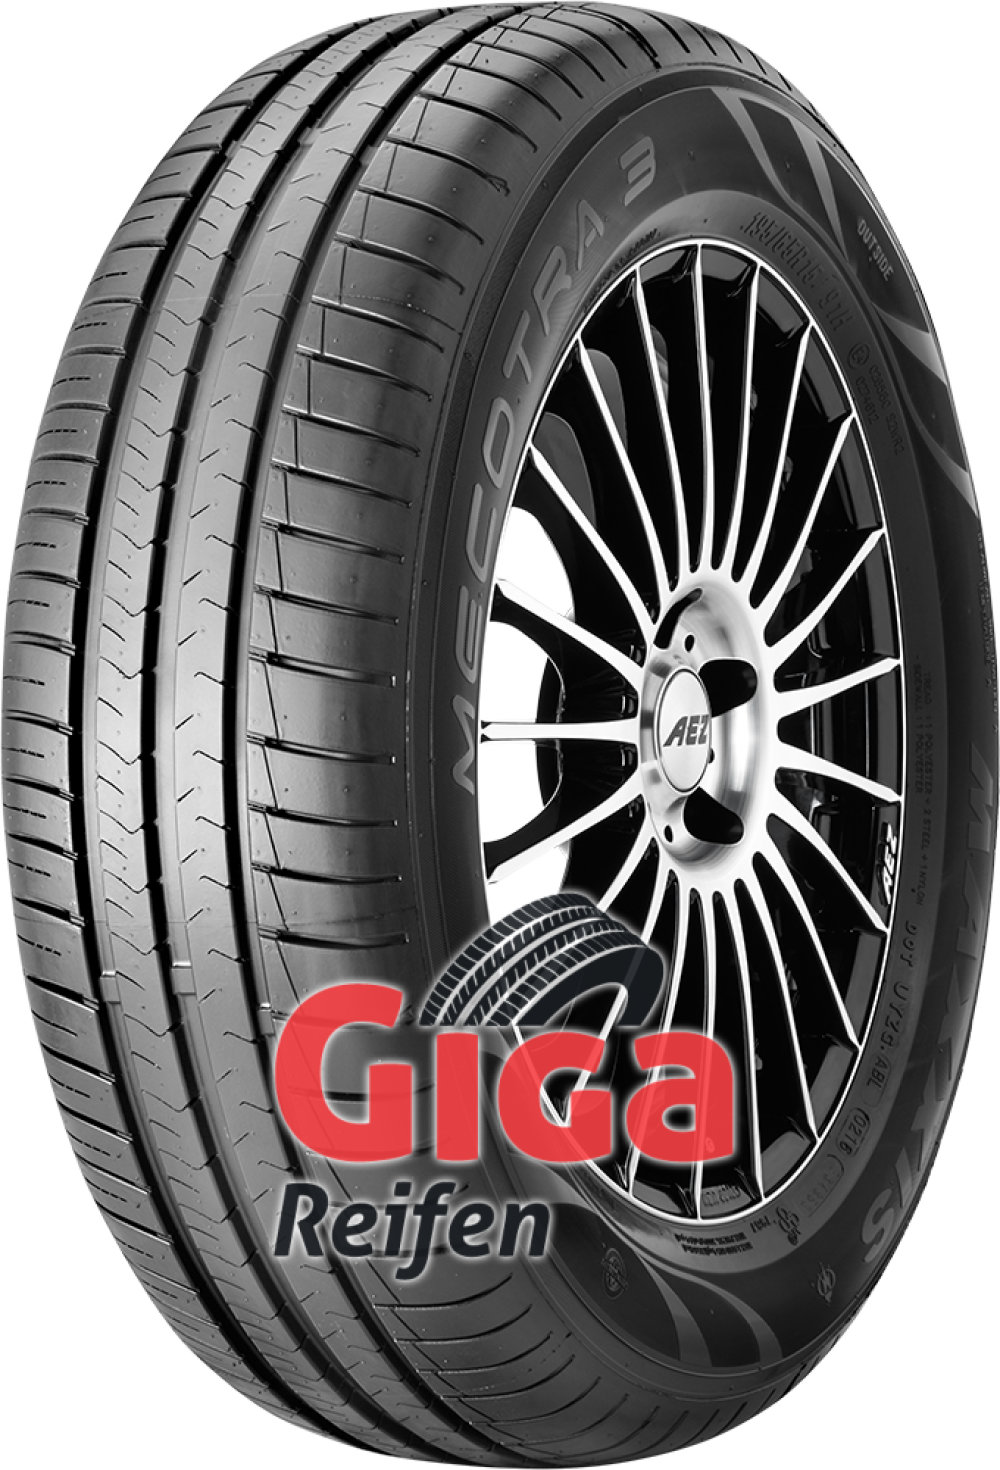 Maxxis Mecotra 3 ( 185/65 R15 88H ) von Maxxis